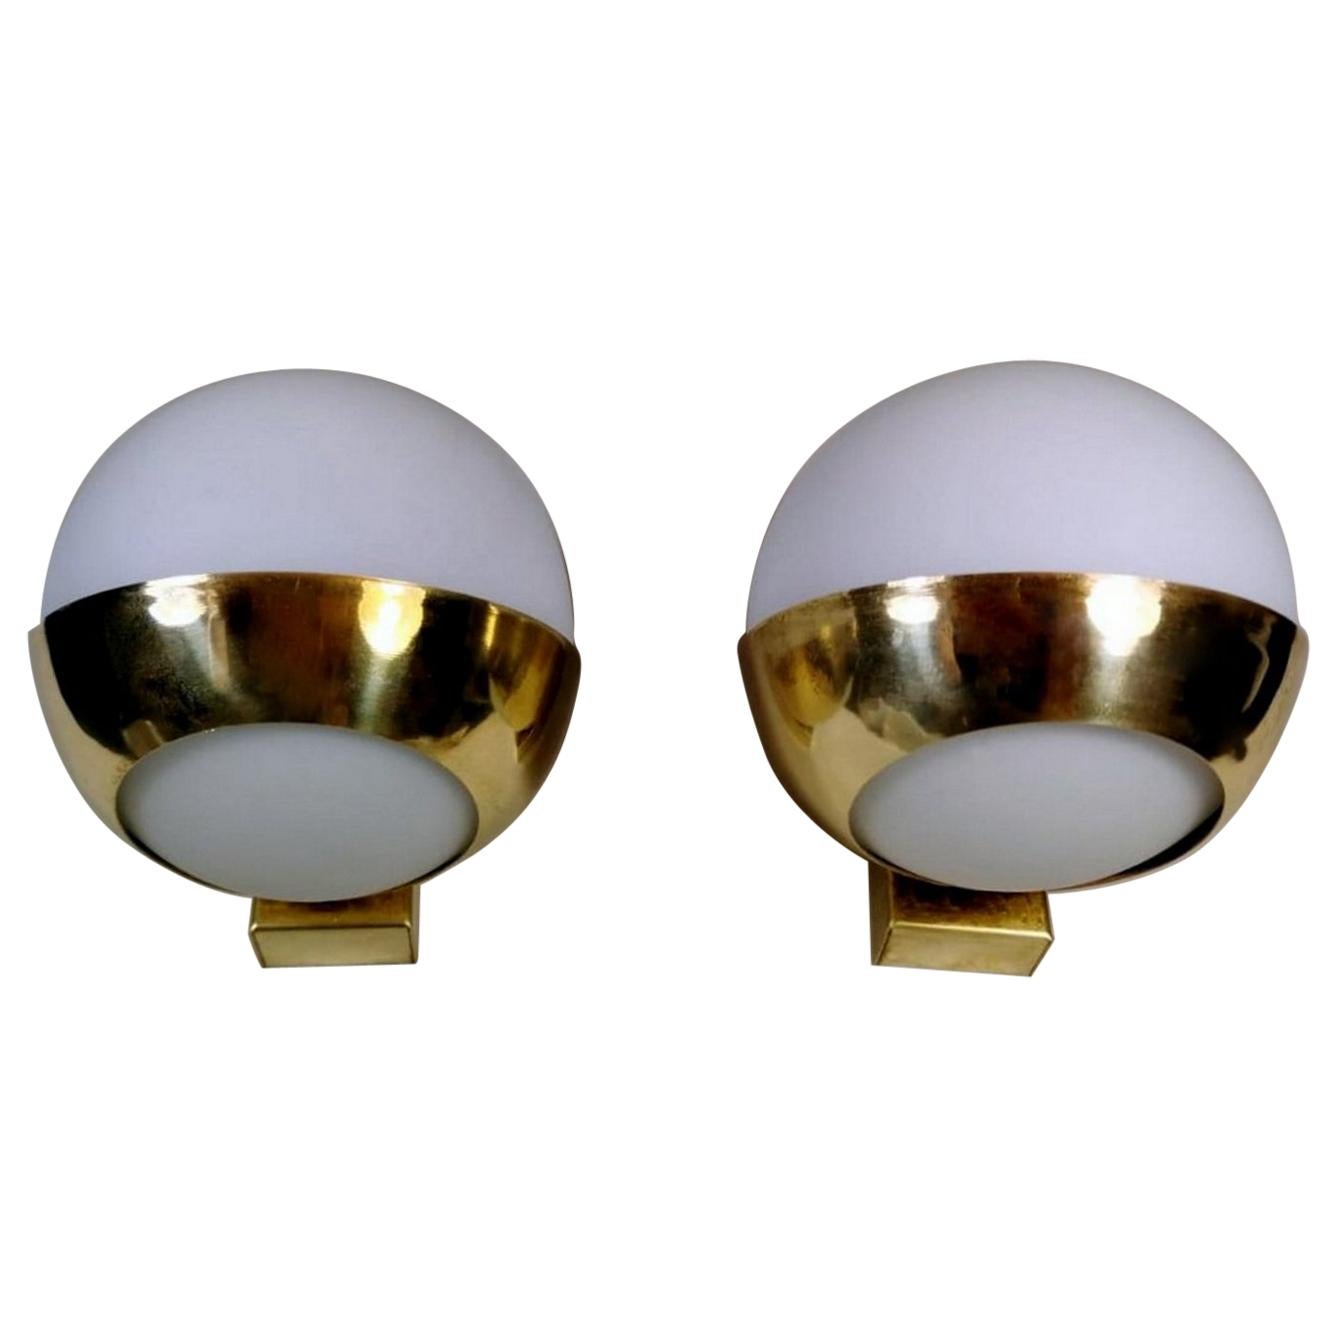 Stilnovo Style Italian Pair of Brass Wall Sconces and Glass Spheres Opaline 